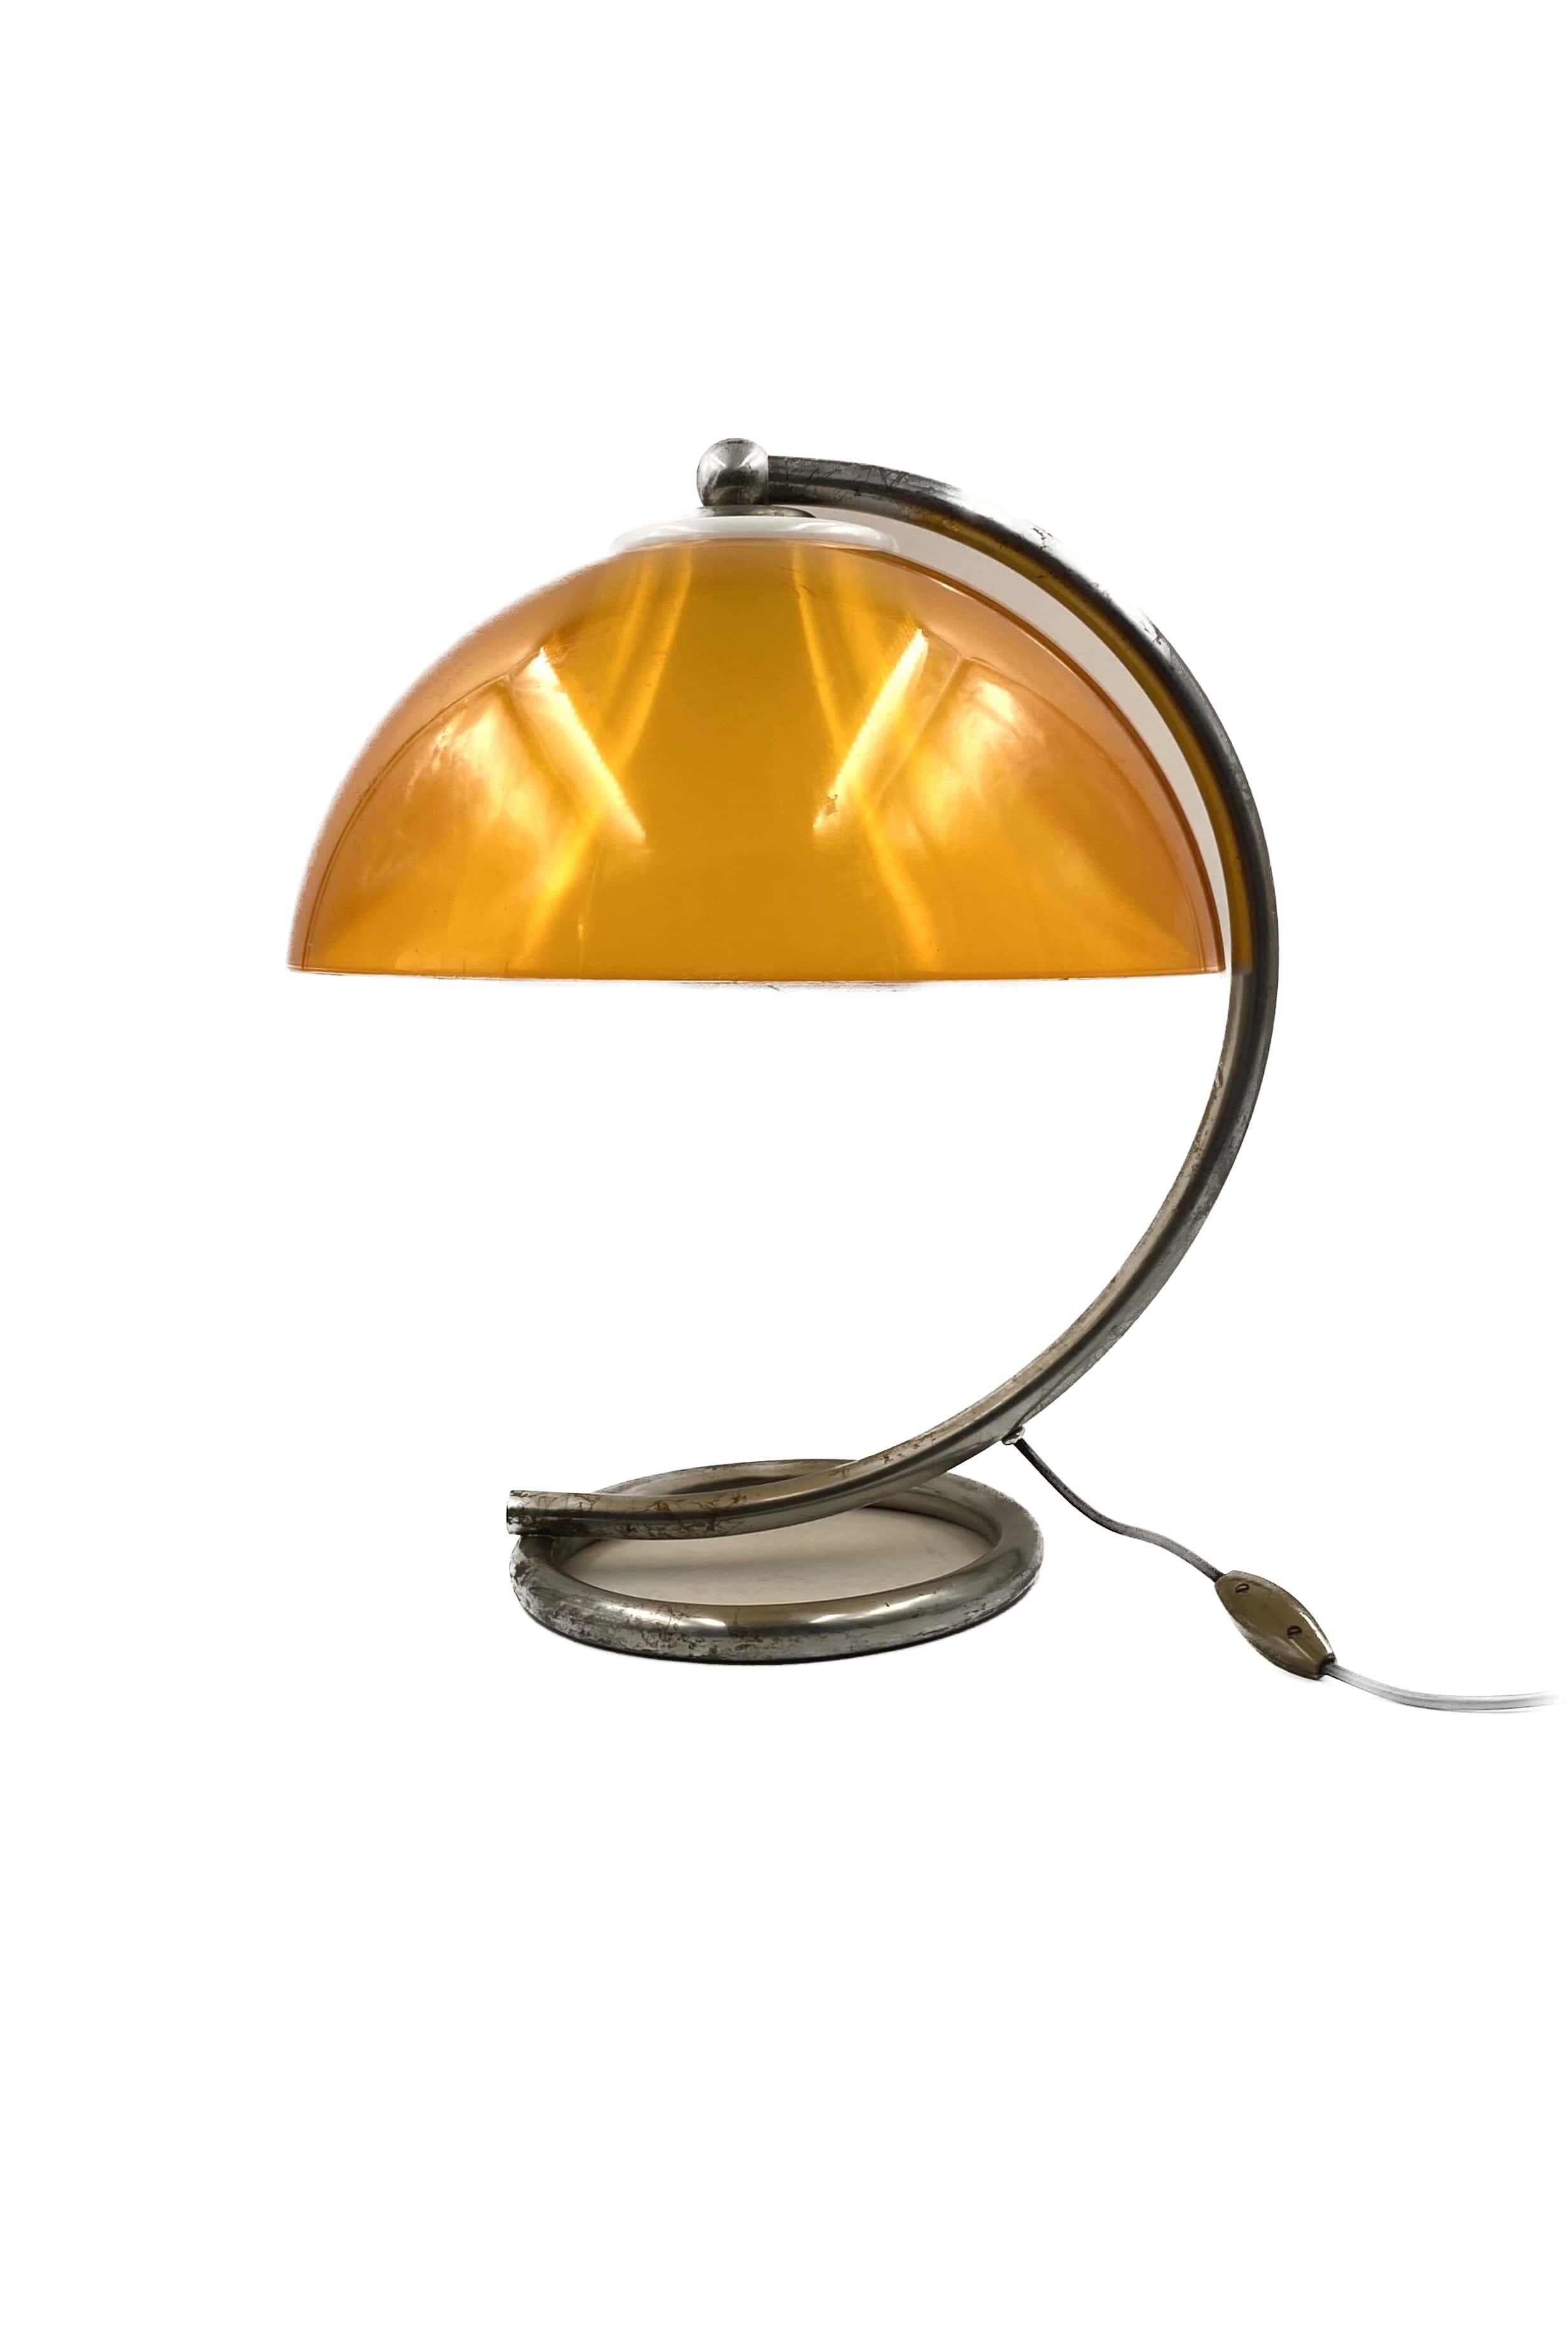 Metal Space age yellow table lamp, France 1960s For Sale